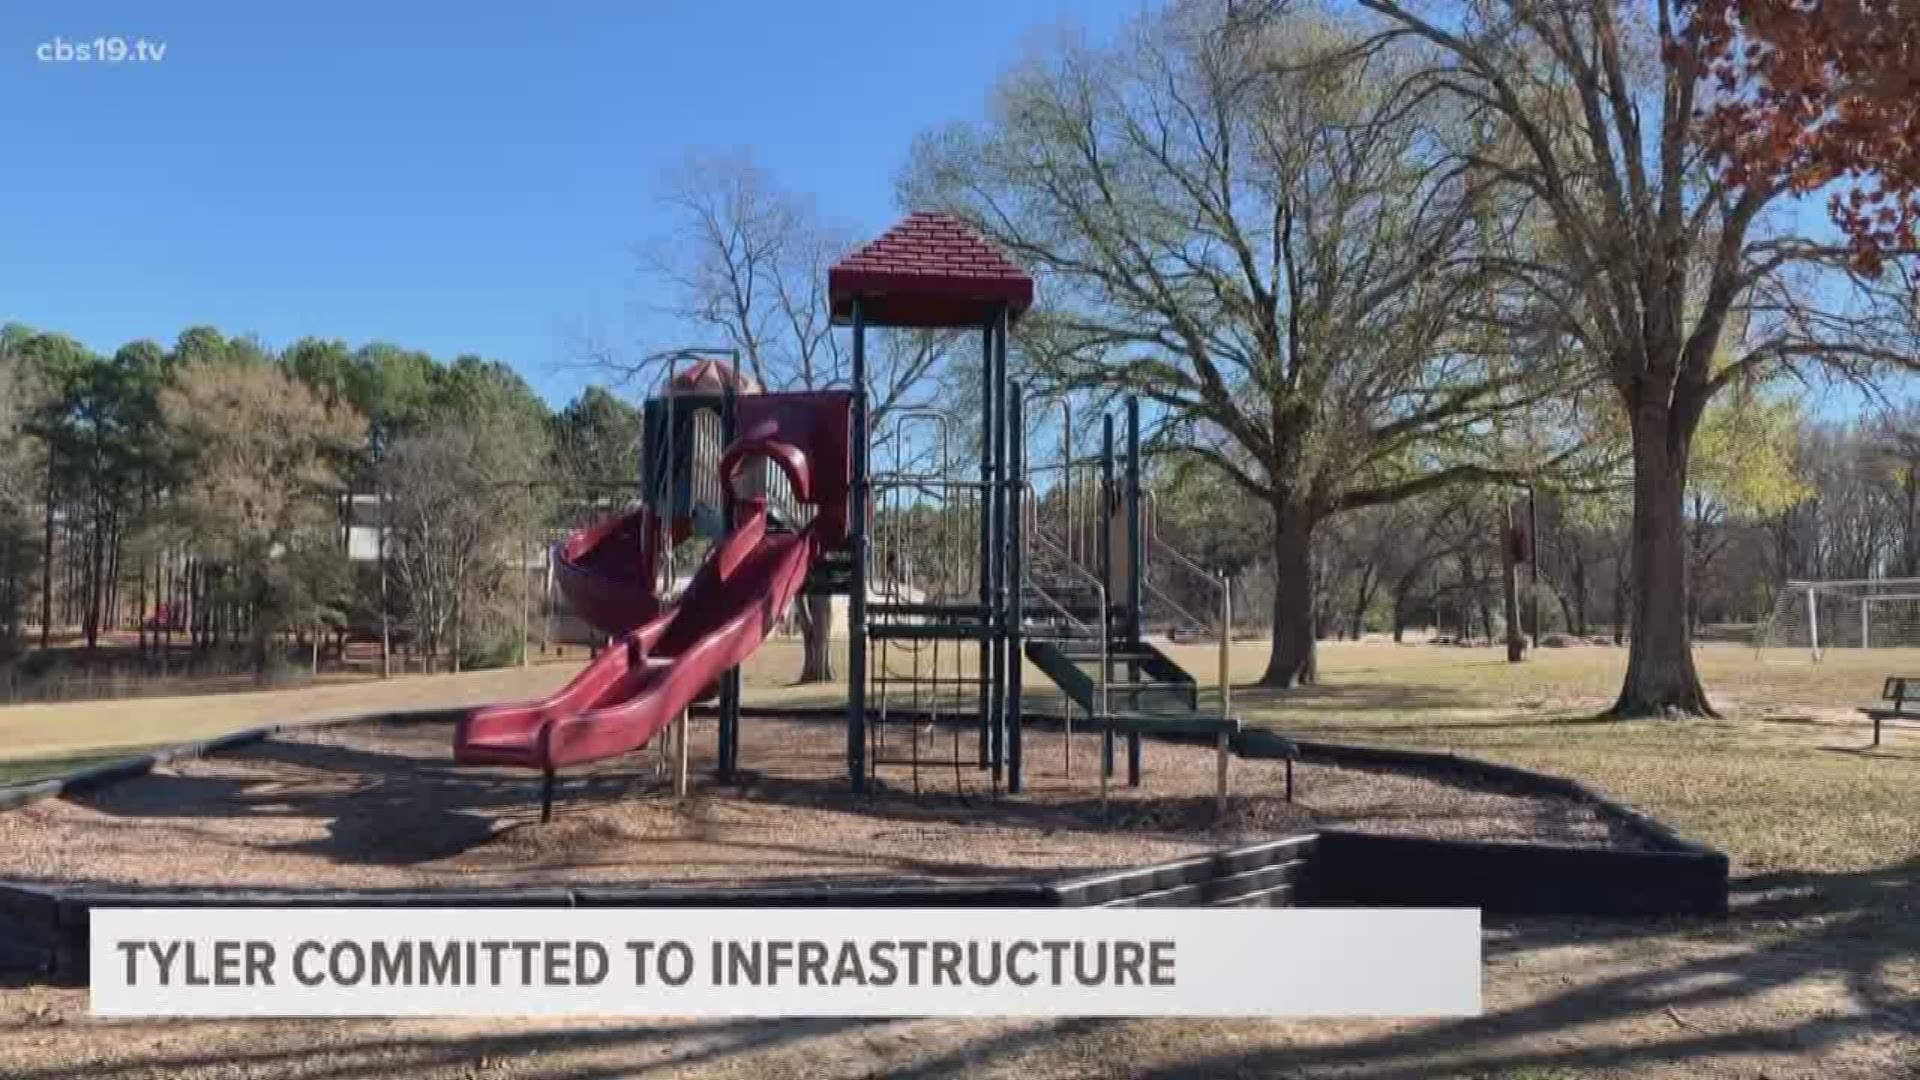 City of Tyler Mayor, Martin Heines, said today's meeting focused on infrastructure and that will continue throughout the year.